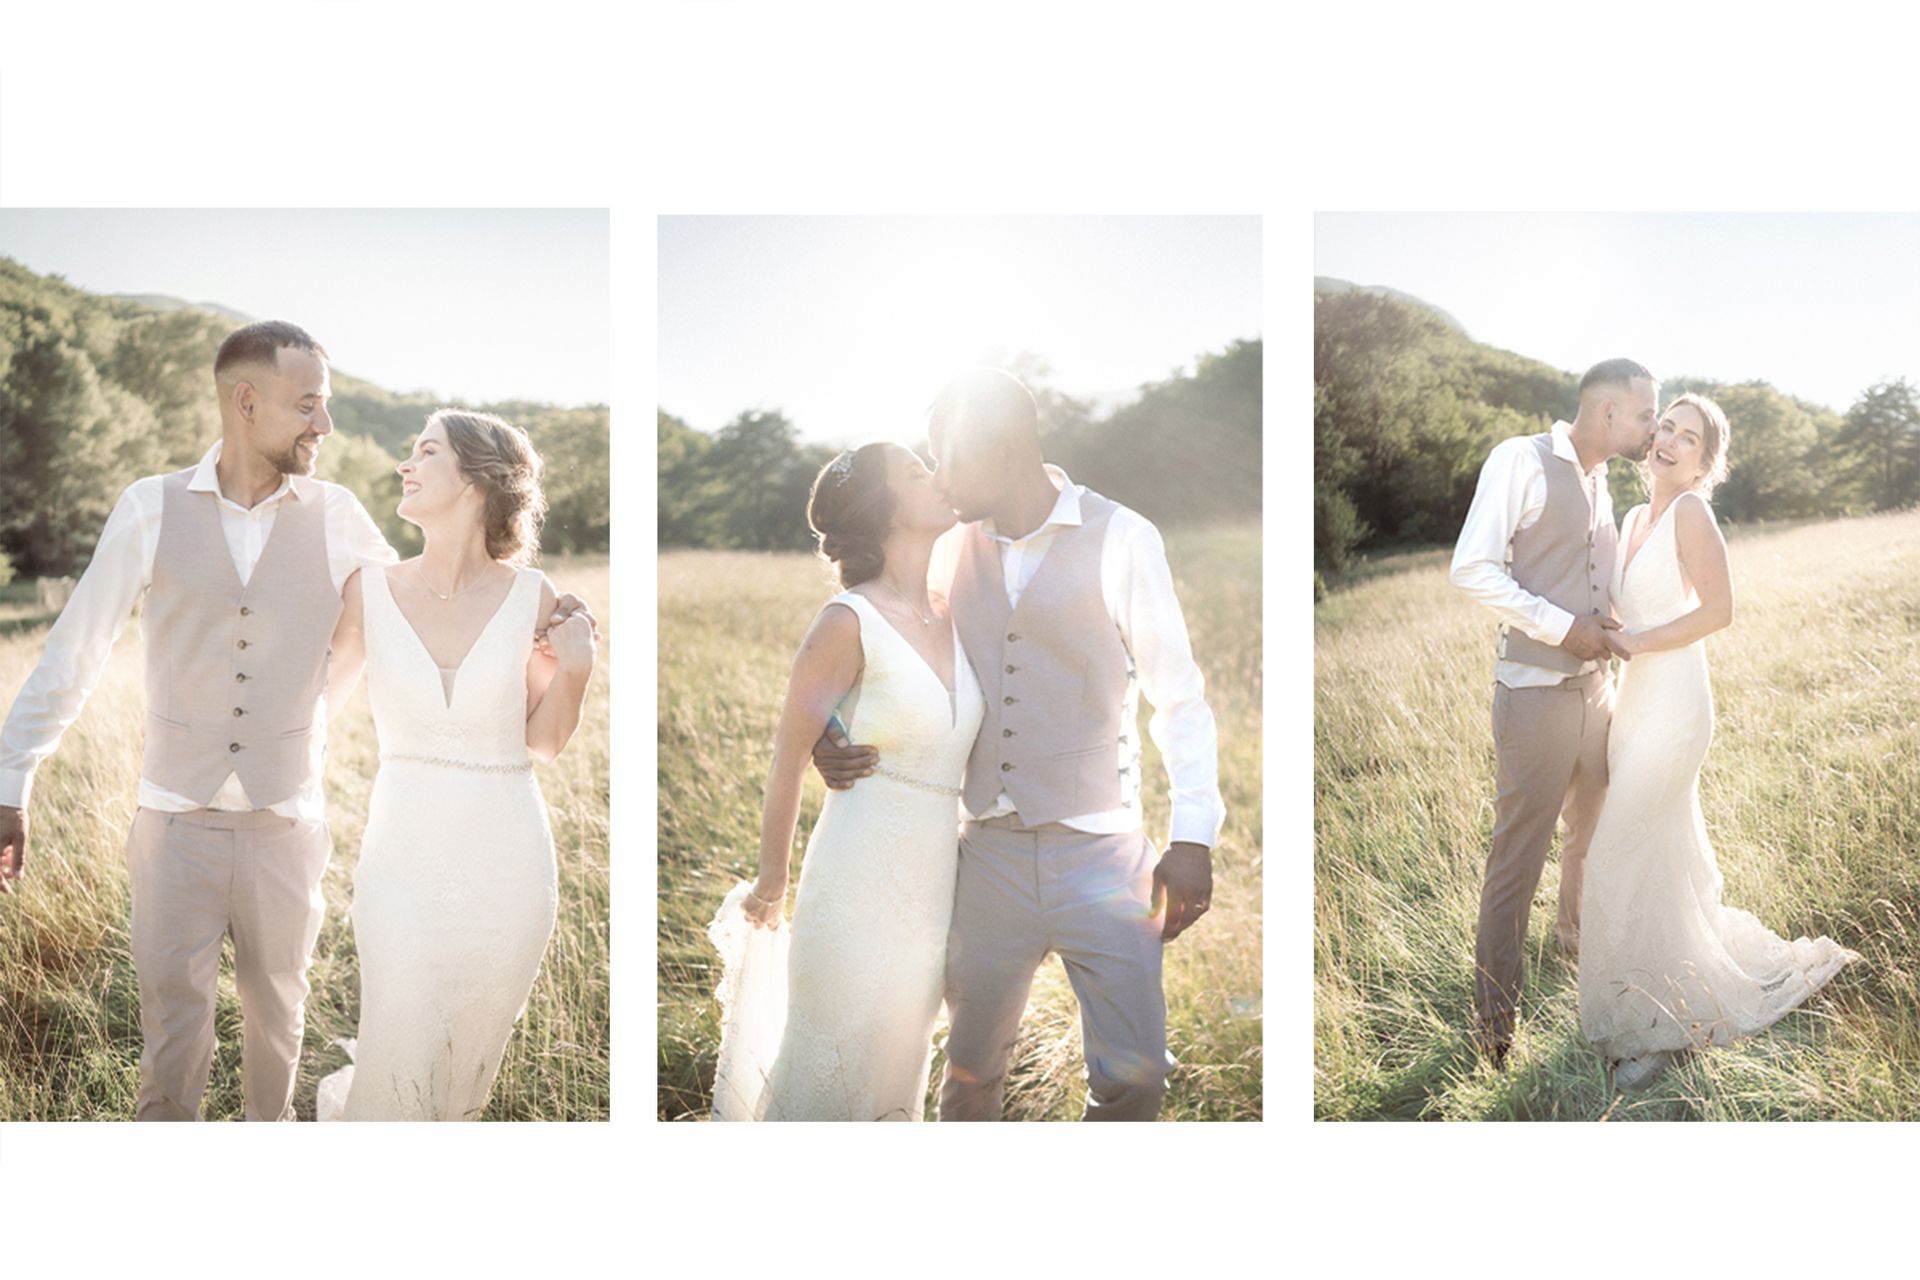 natural, unposed wedding photography of a couple marrying in France